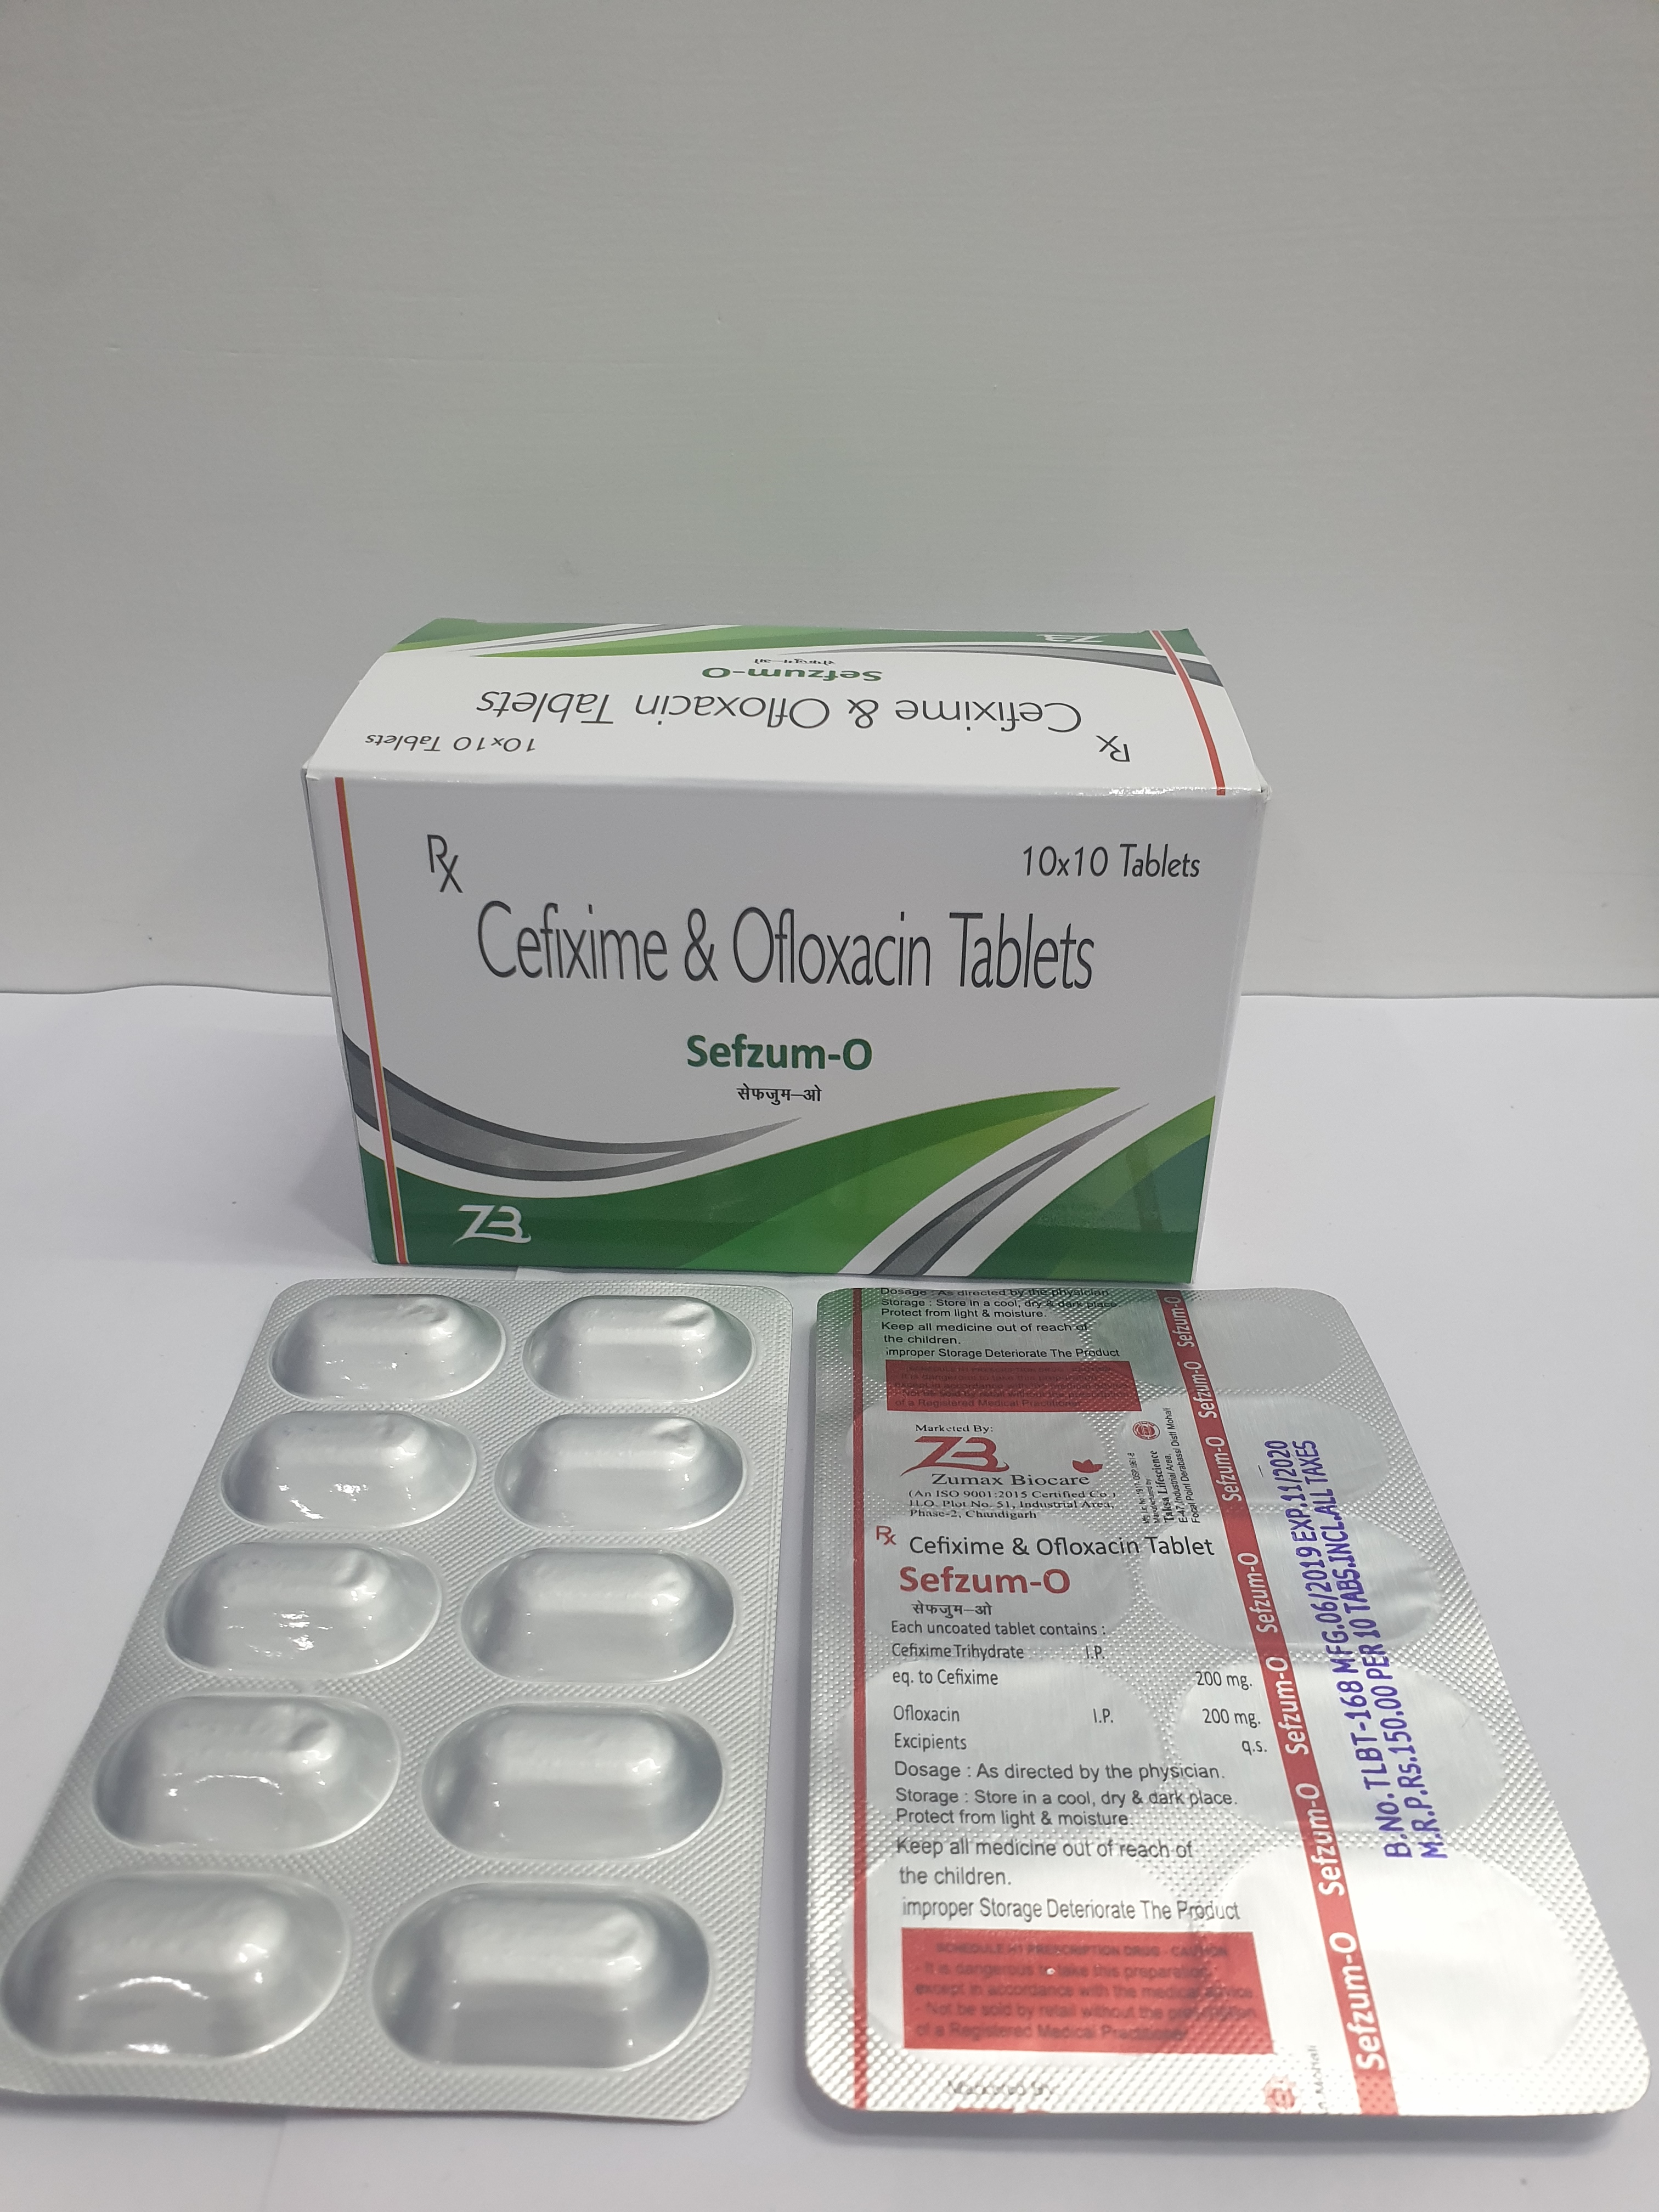 Product Name: Sefzum O, Compositions of Cefixime & ofloxacin Tablets are Cefixime & ofloxacin Tablets - Zumax Biocare